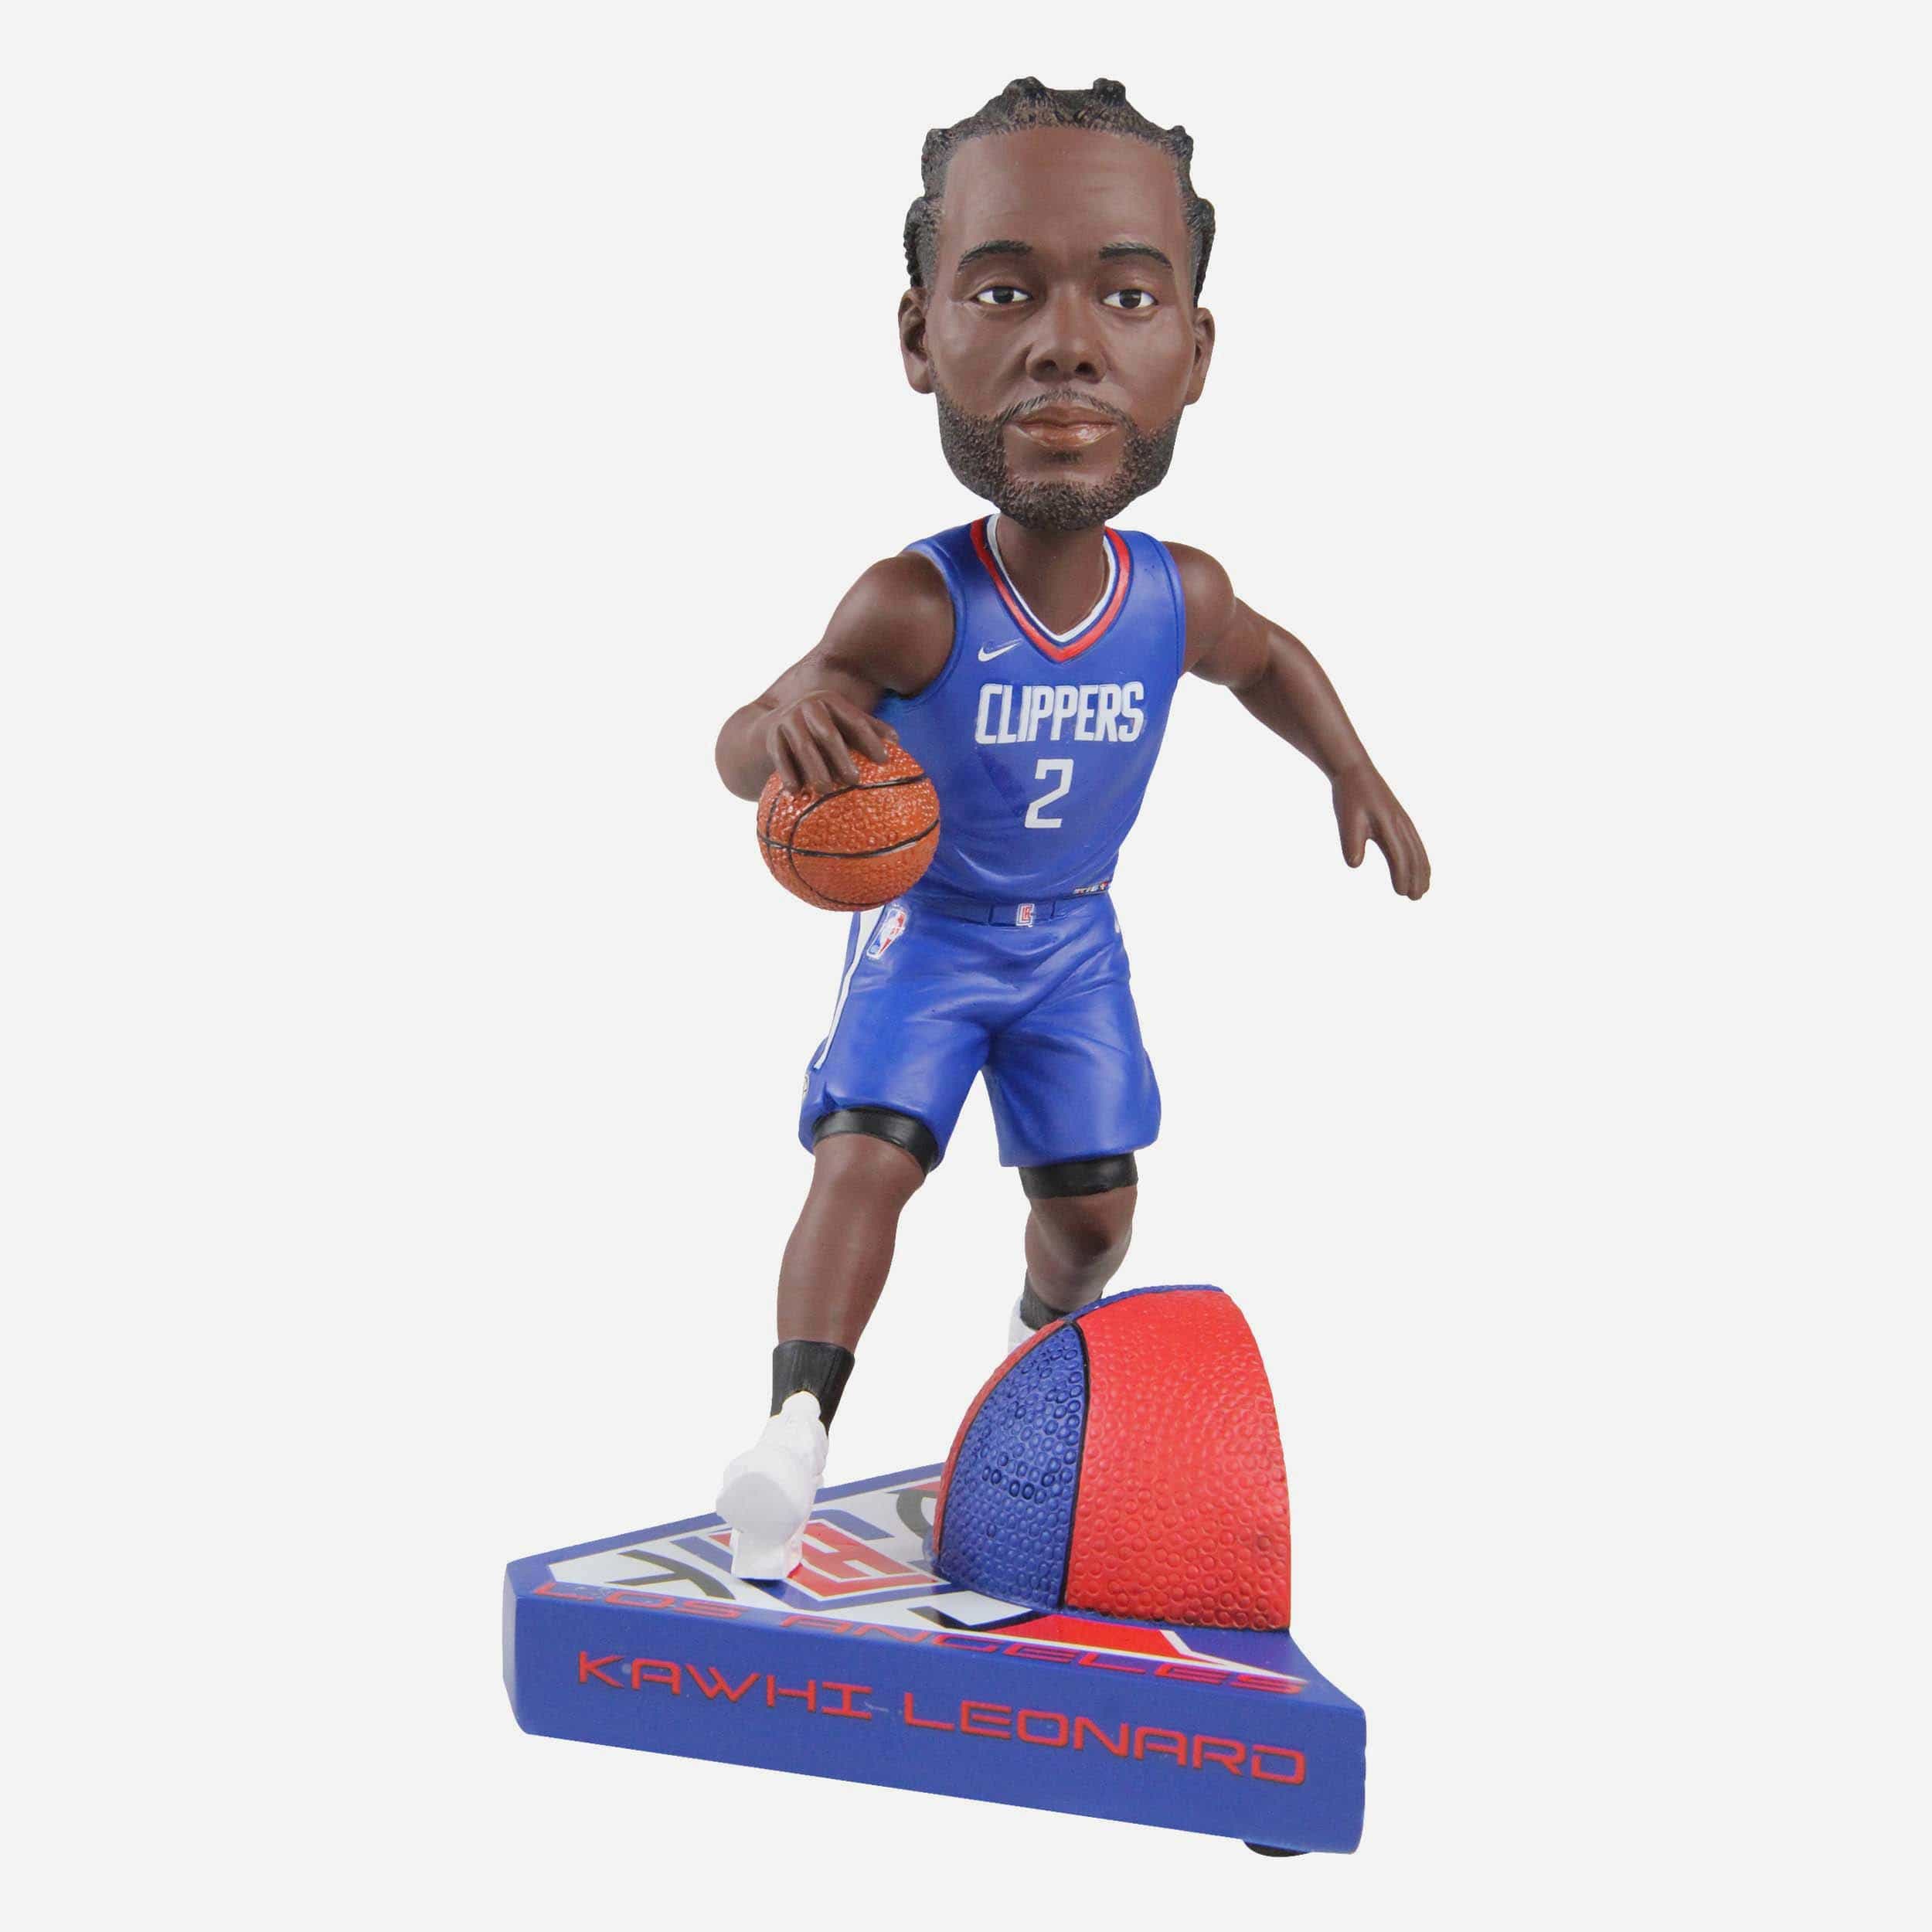 Kawhi Leonard Los Angeles Clippers Dynamic Duo Bobblehead Officially Licensed by NBA